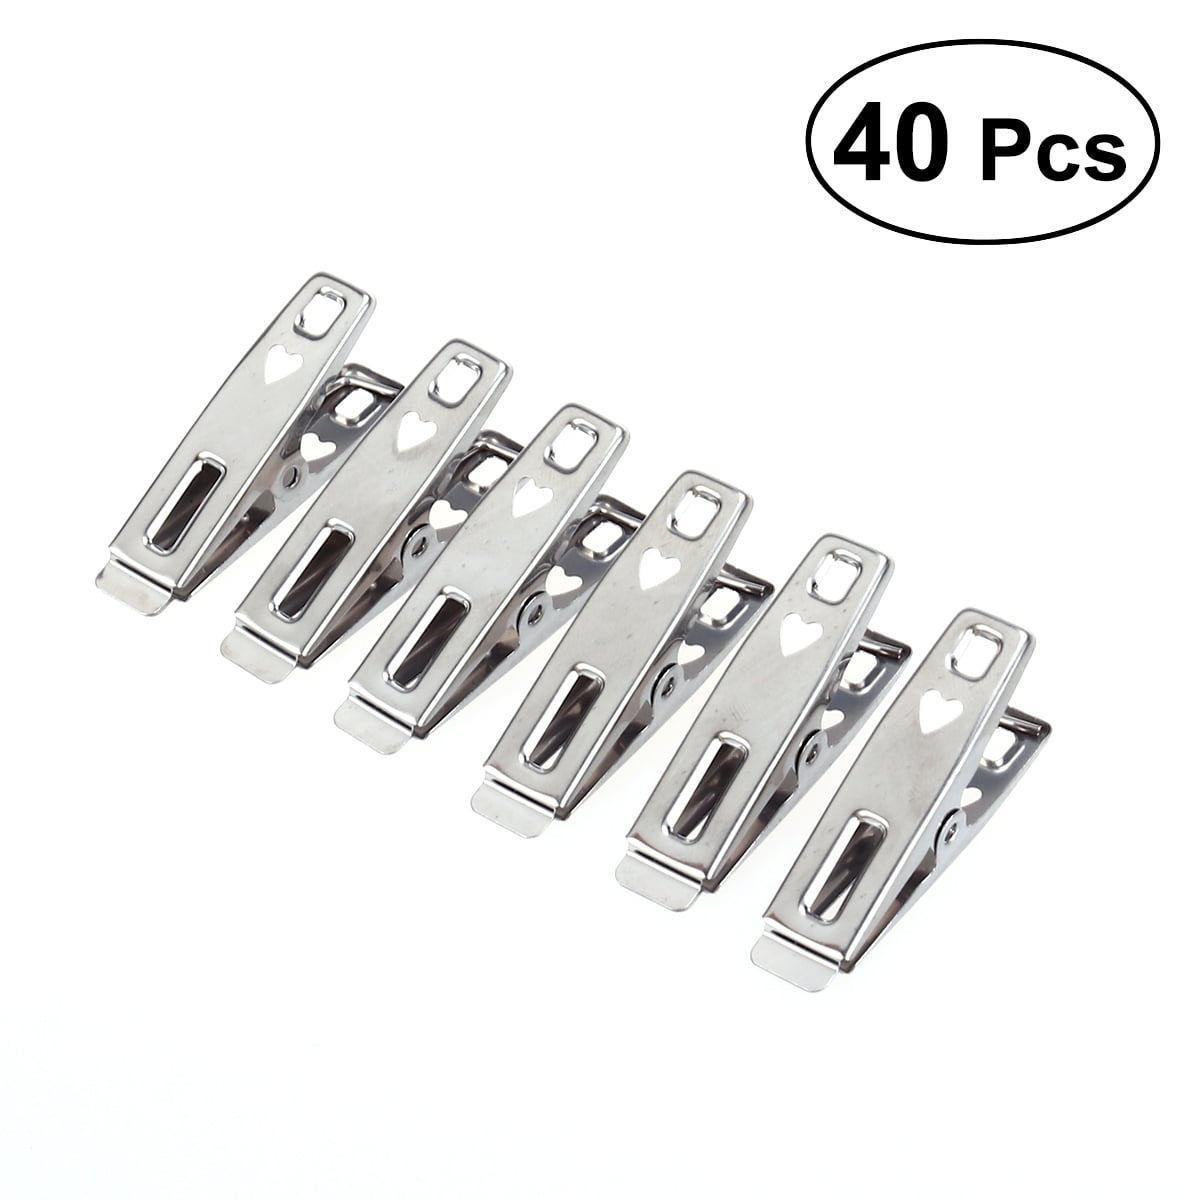 40pcs Stainless Steel Clothes Pegs Laundry Hanging Clips Pins Clamps Holders NEW 